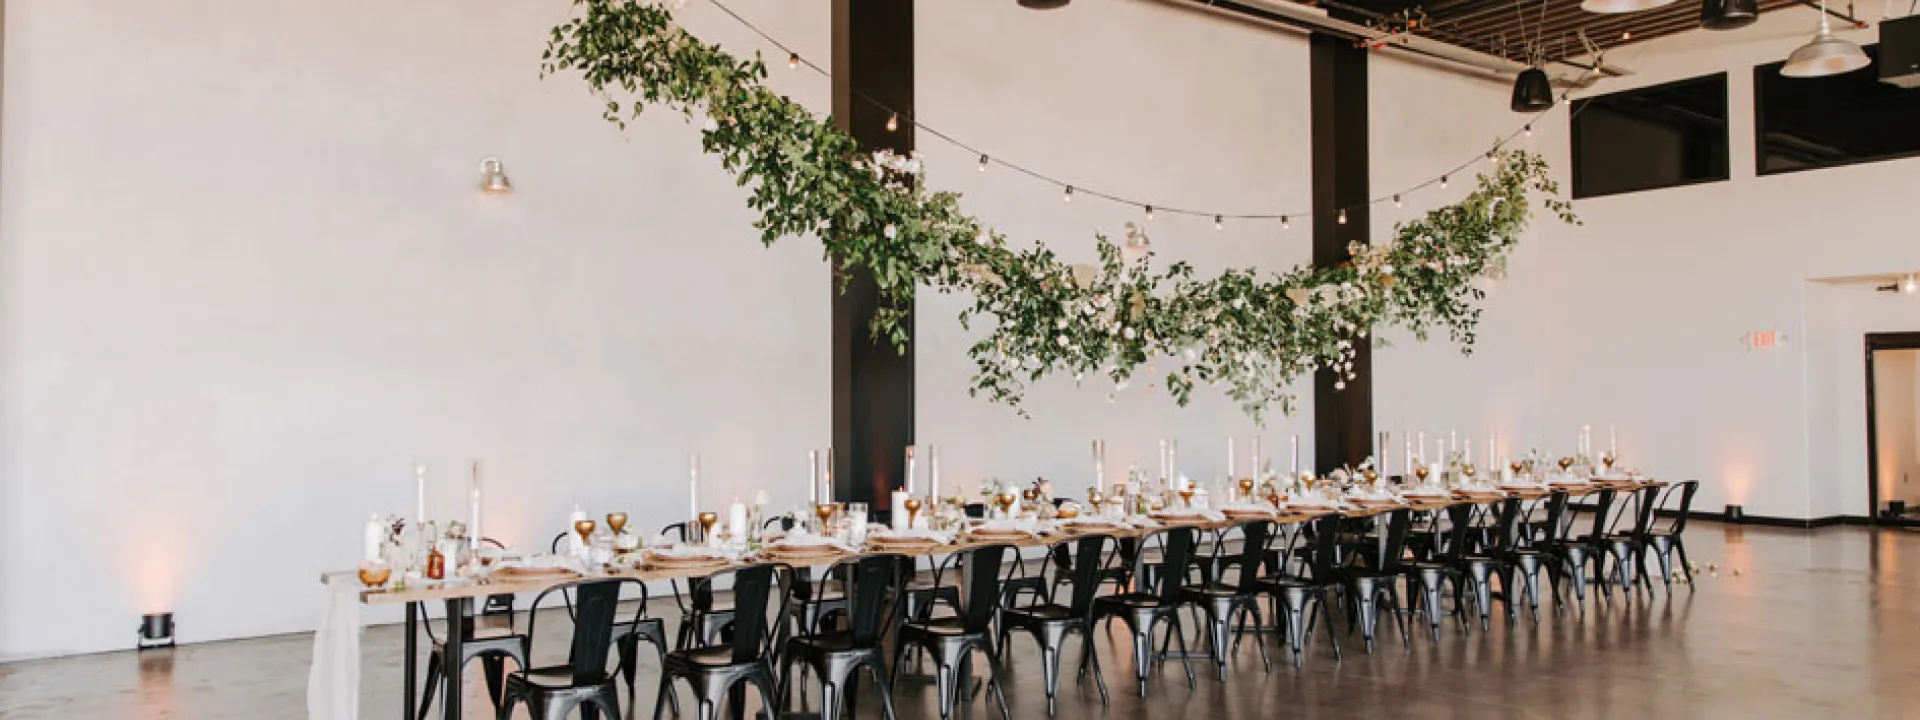 A mod-inspired wedding tablescape at Hangar 21 South in Fullerton.